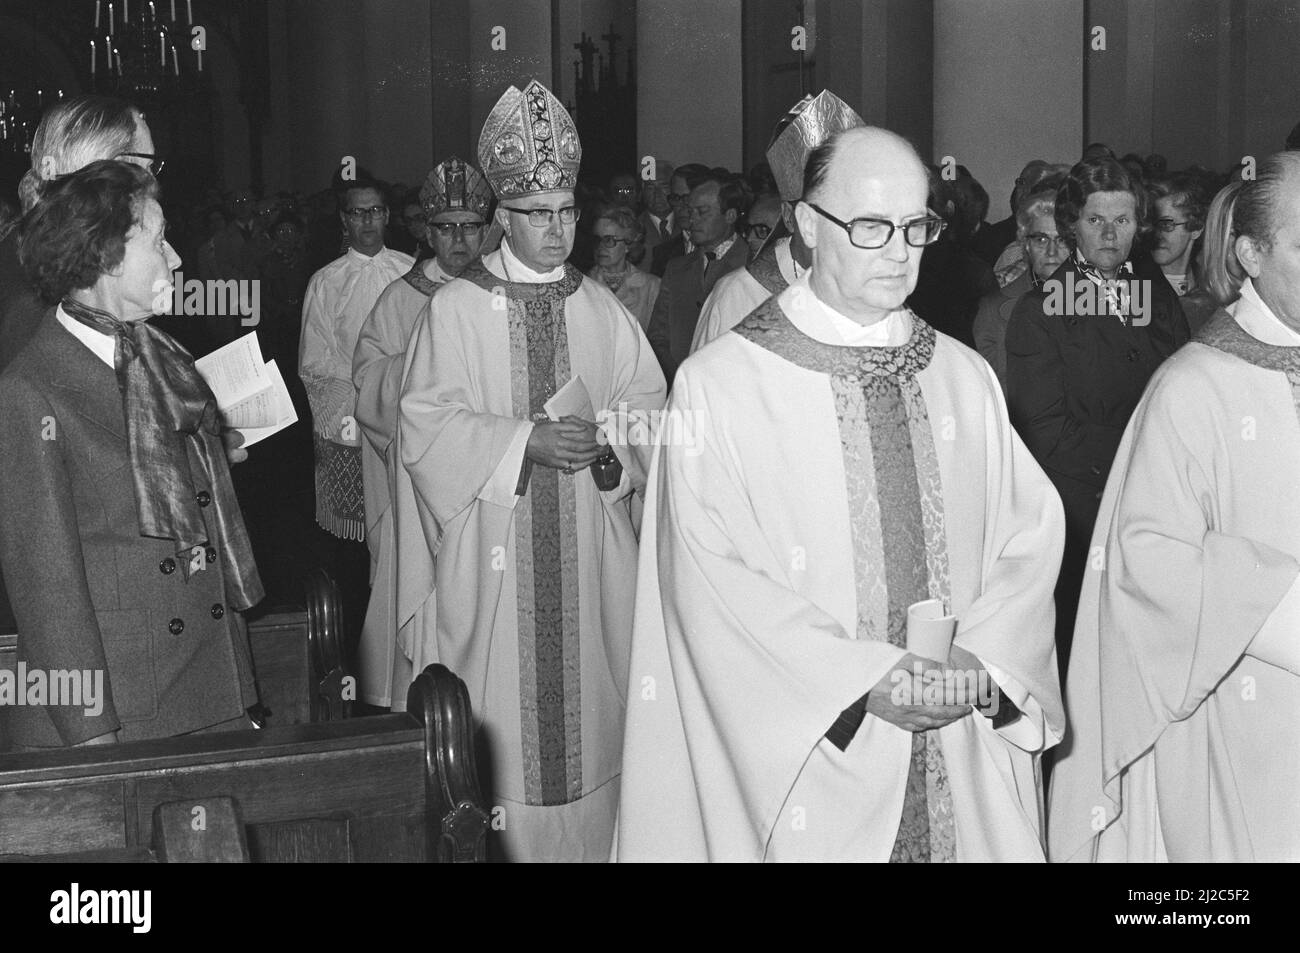 Jubilee and farewell of Cardinal Alfrink during Eucharistic celebration in Utrecht, Cardinal Alfrink speaks ca. 28 May 1976 Stock Photo